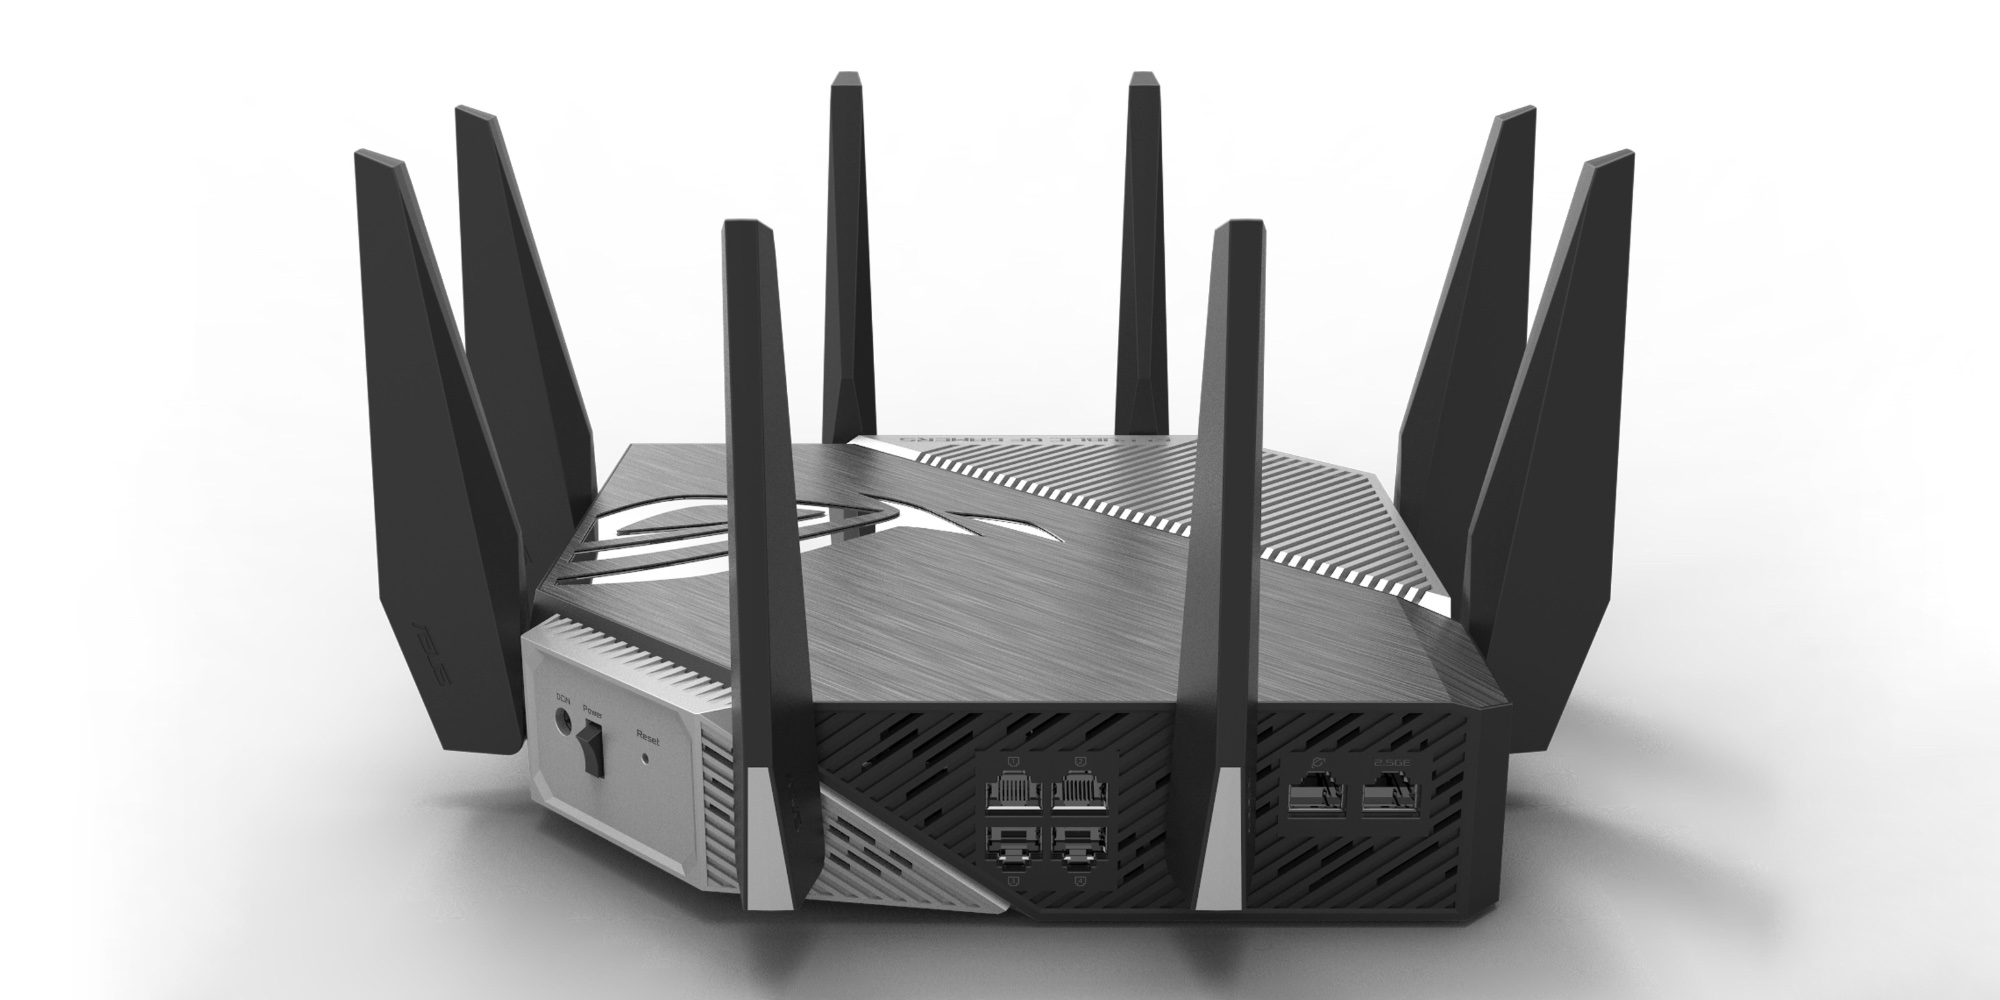 ASUS brings WiFi 6E to the market for the first time with router